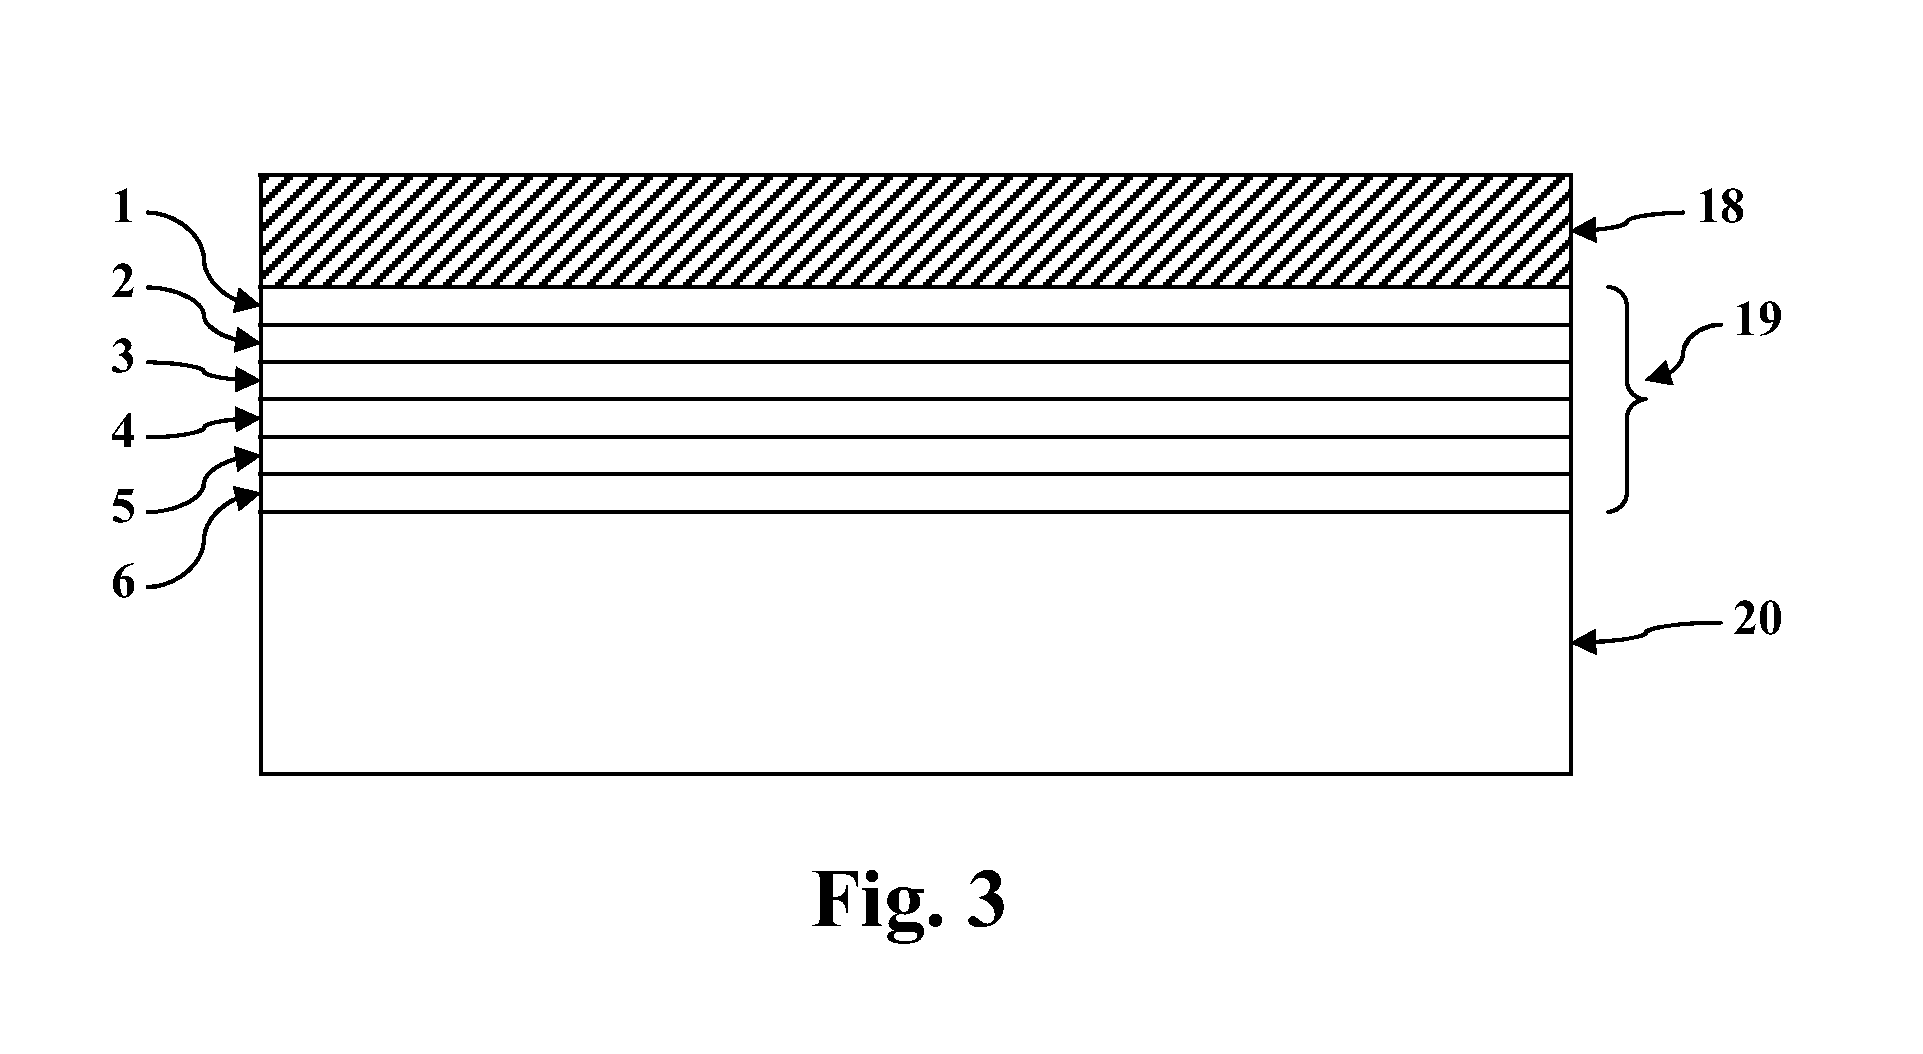 Mixed sputtering target of cadmium sulfide and cadmium telluride and methods of their use